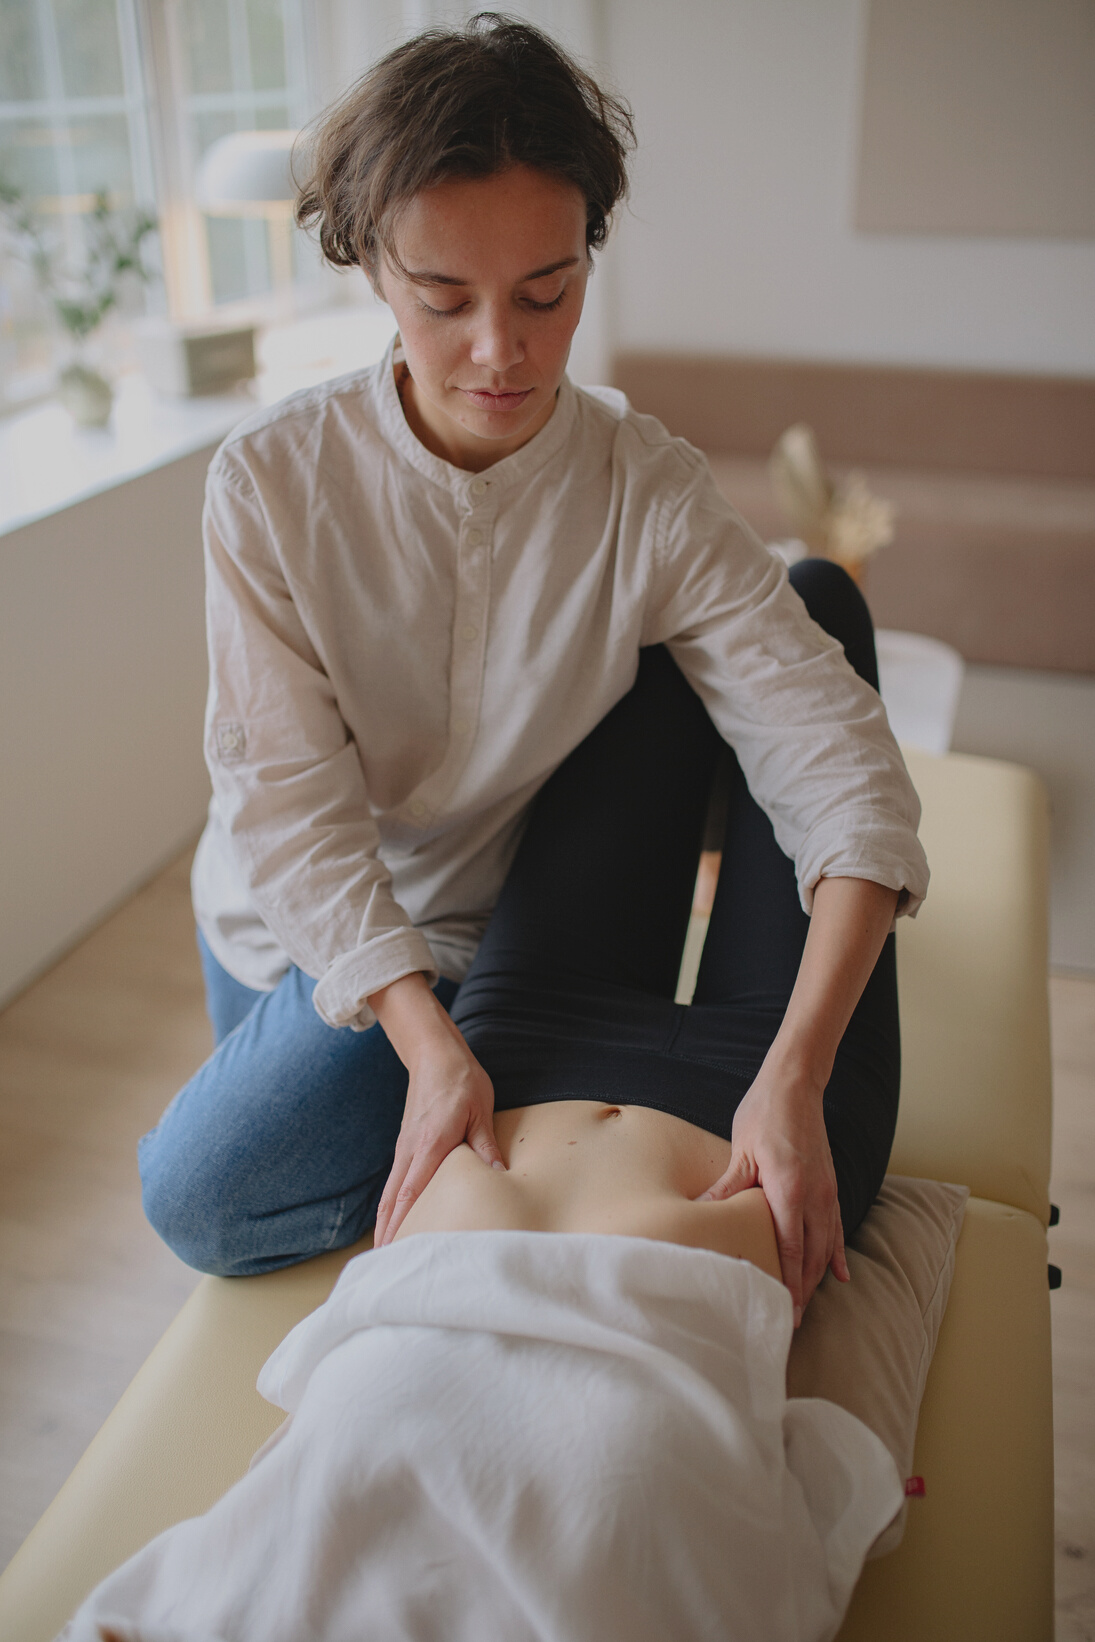 A Woman in White Top Massaging a Person's Belly